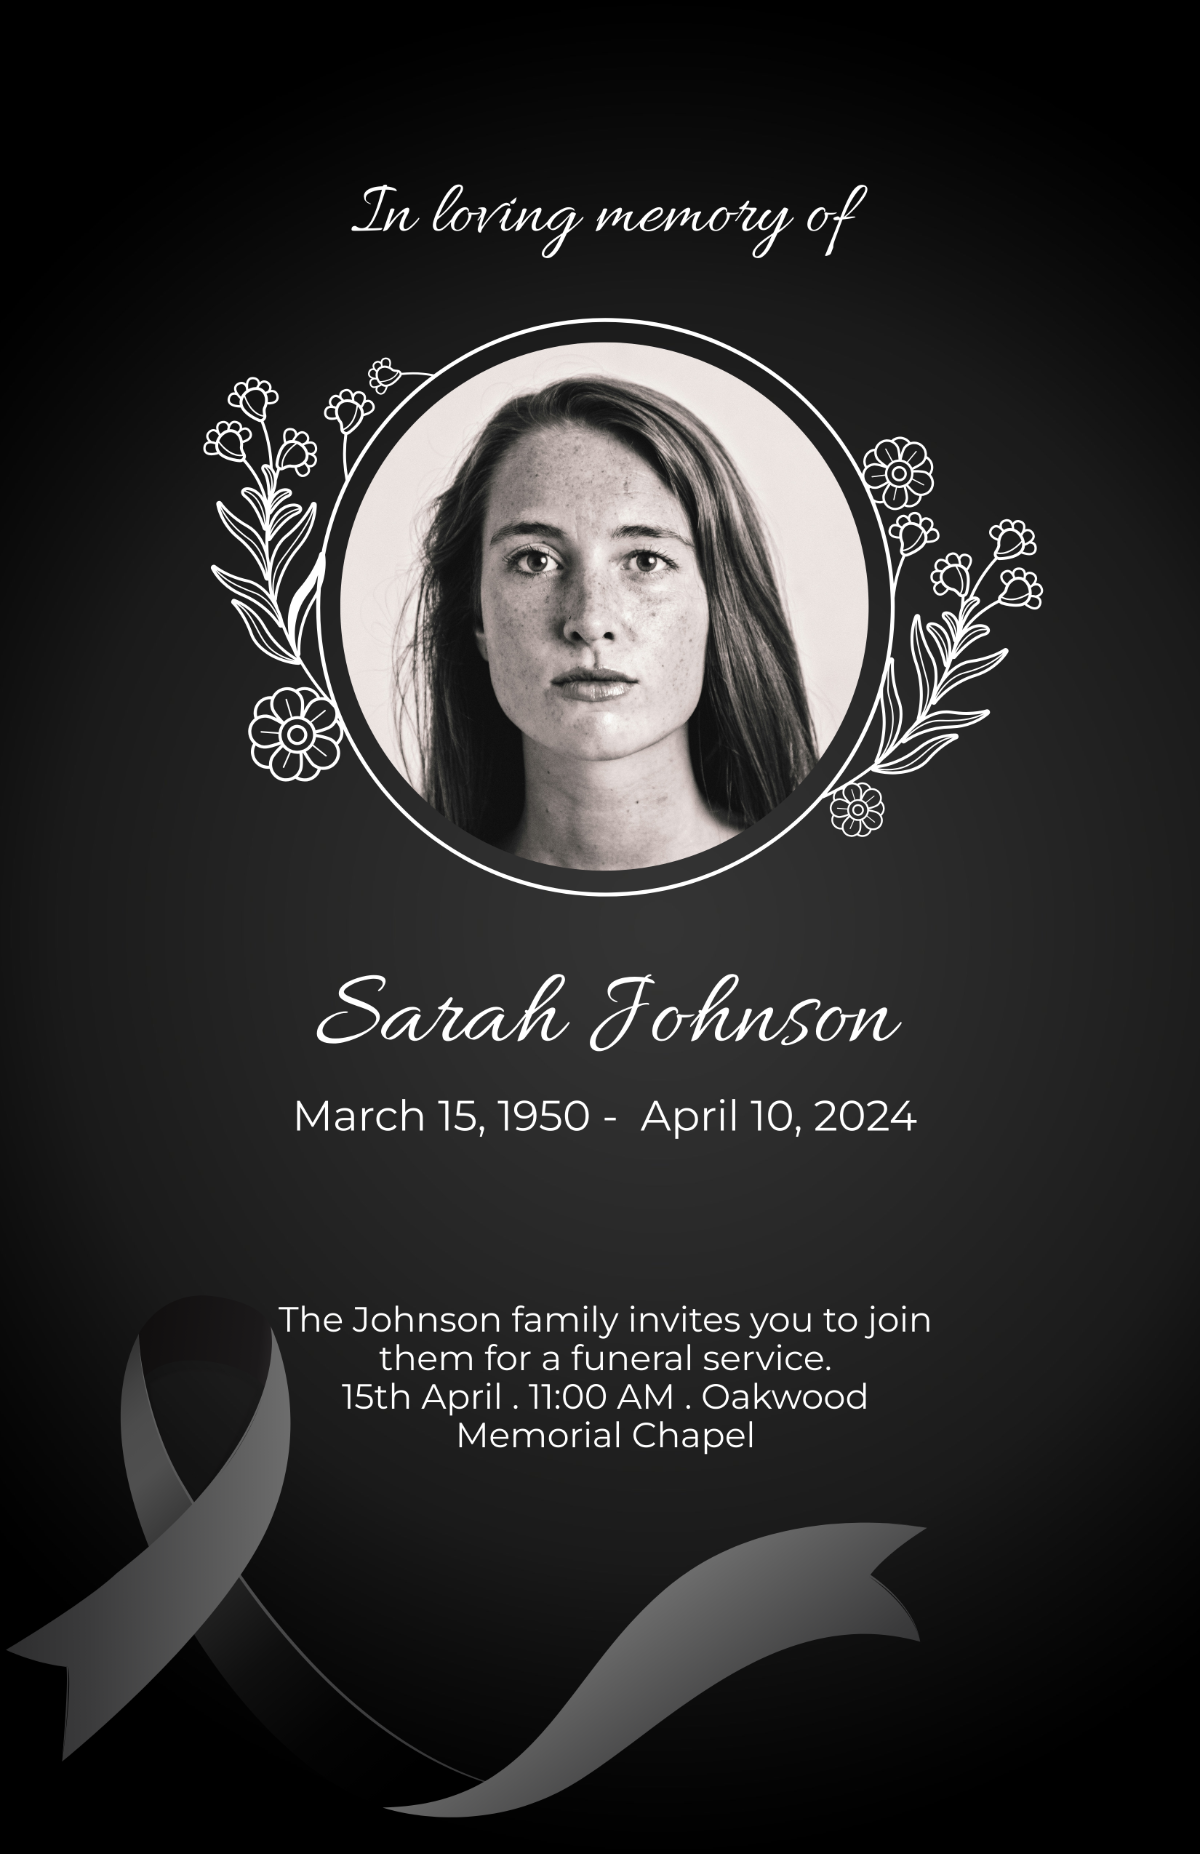 Obituary Poster Template